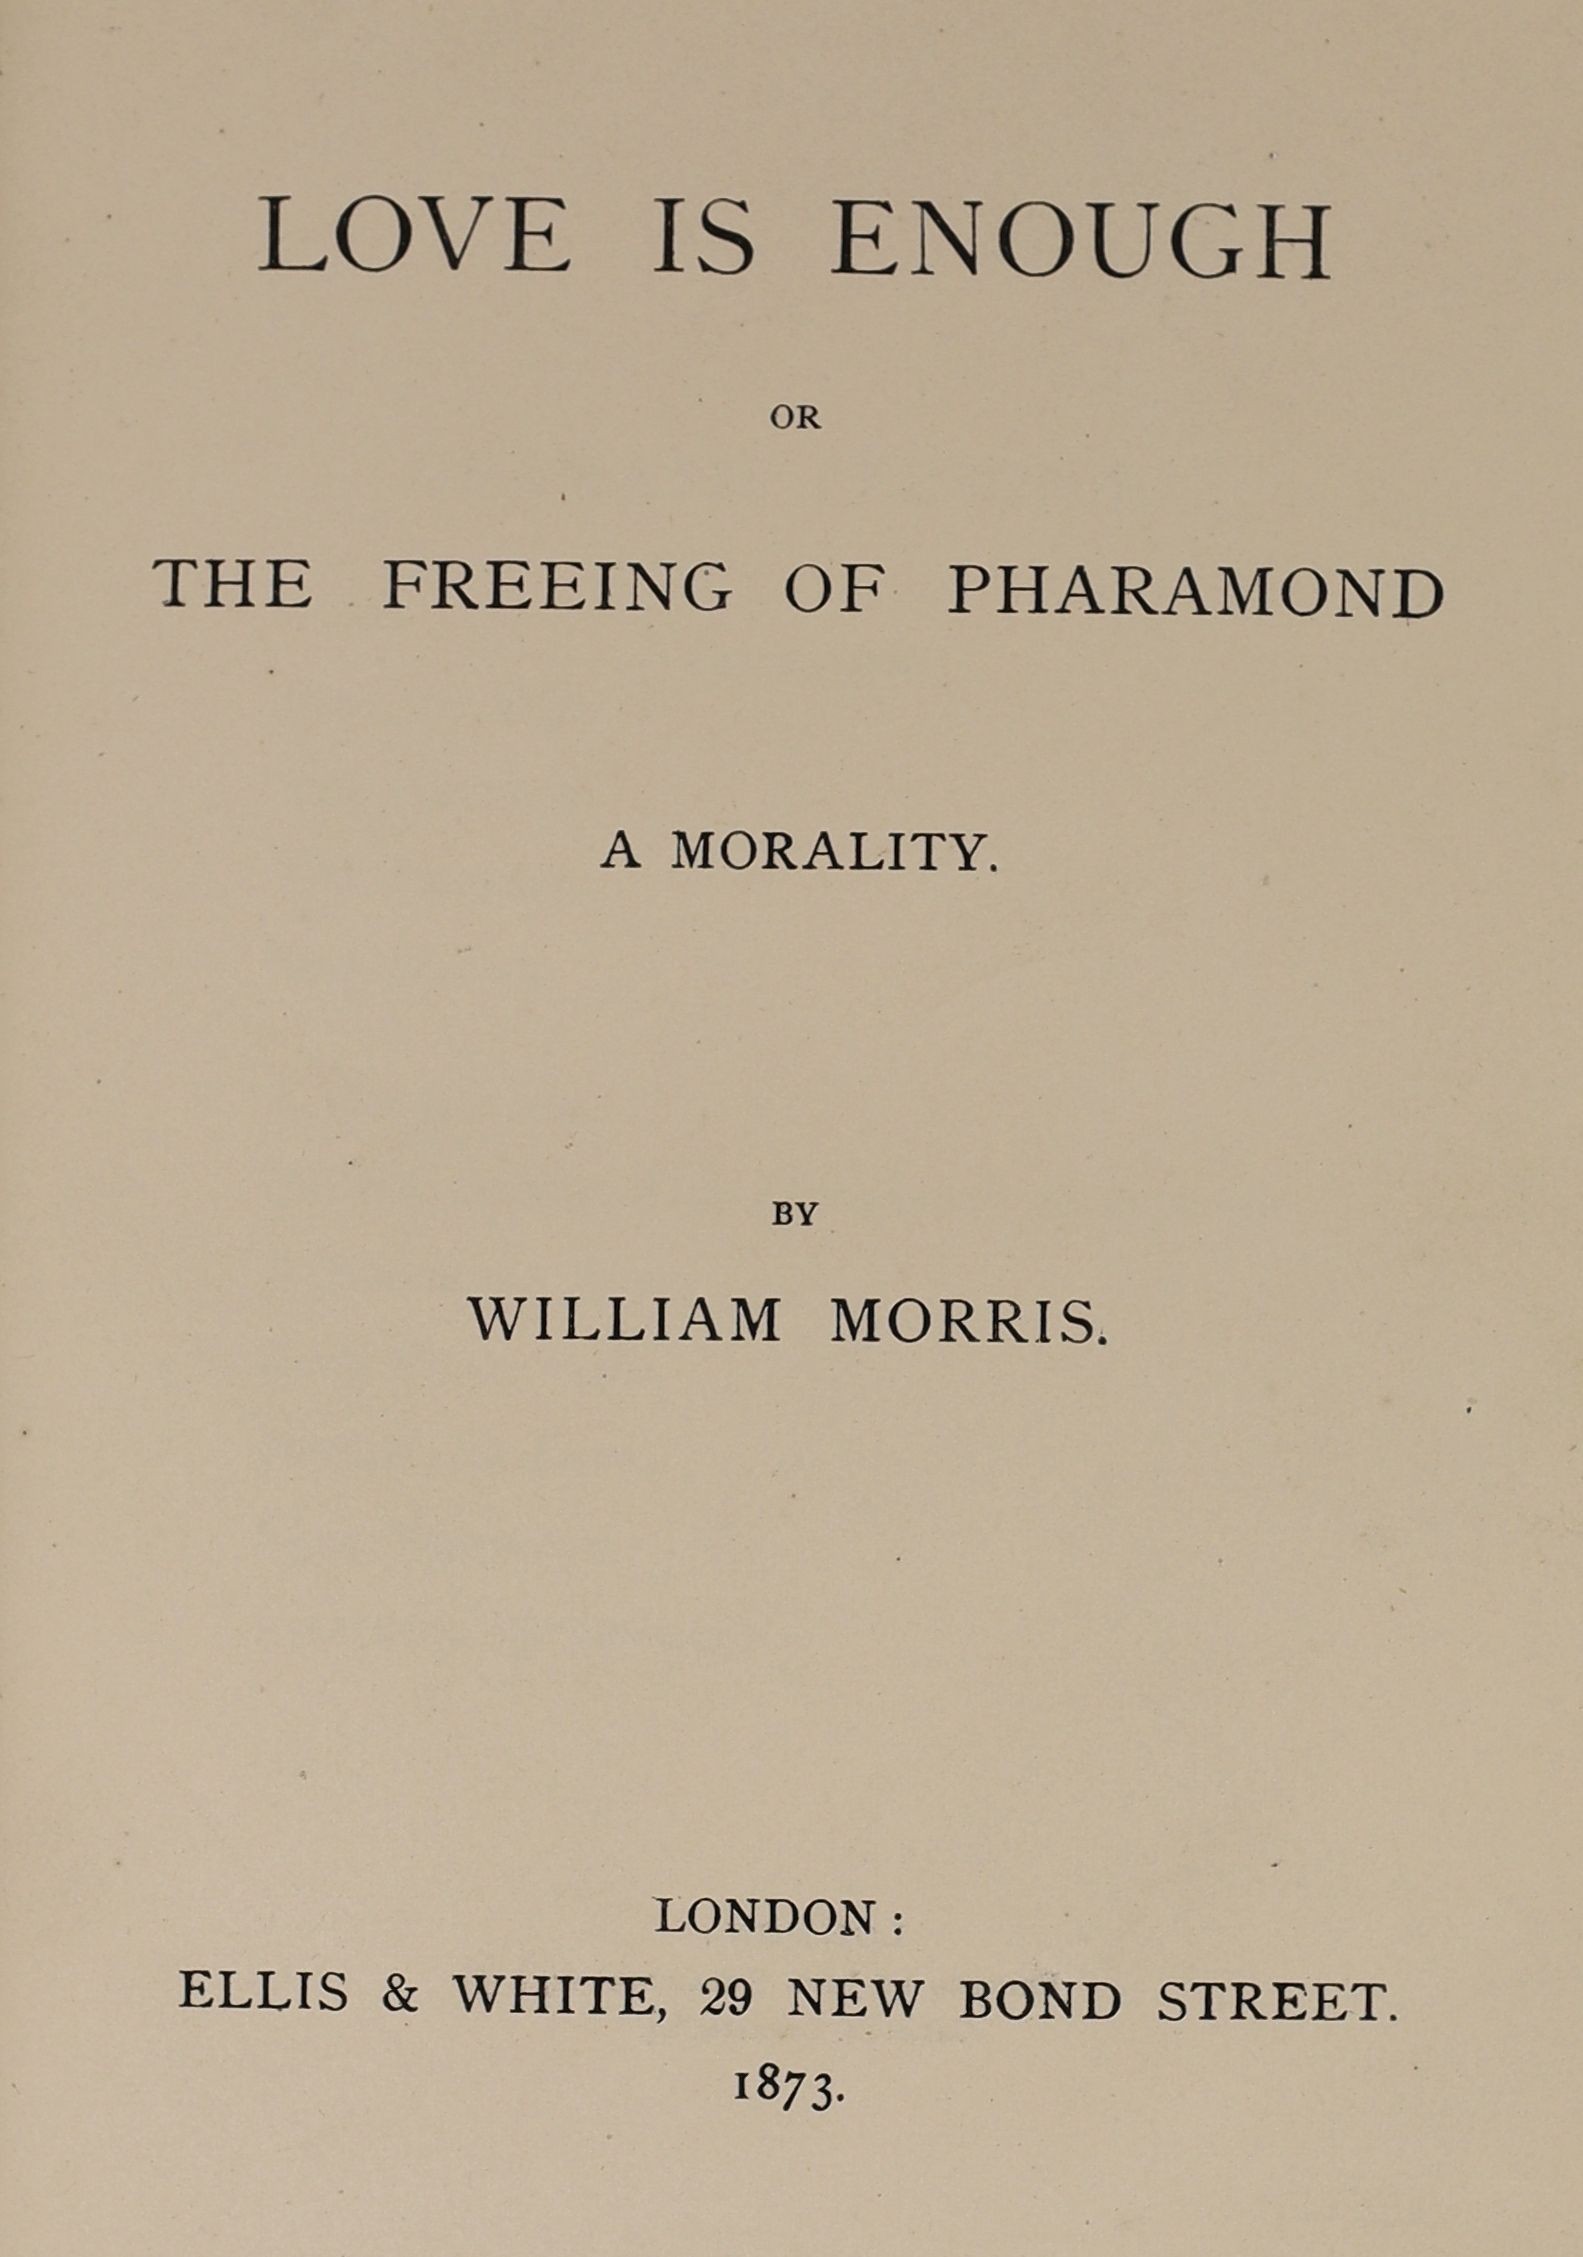 Morris, William - Love is Enough or The Feeing of Pharamond, 8vo, cloth gilt cover design by William Morris, Ellis and White, London, 1873 and Wilde, Oscar - The Picture of Dorian Gray, 8vo, half cloth, Unicorn Press, Lo